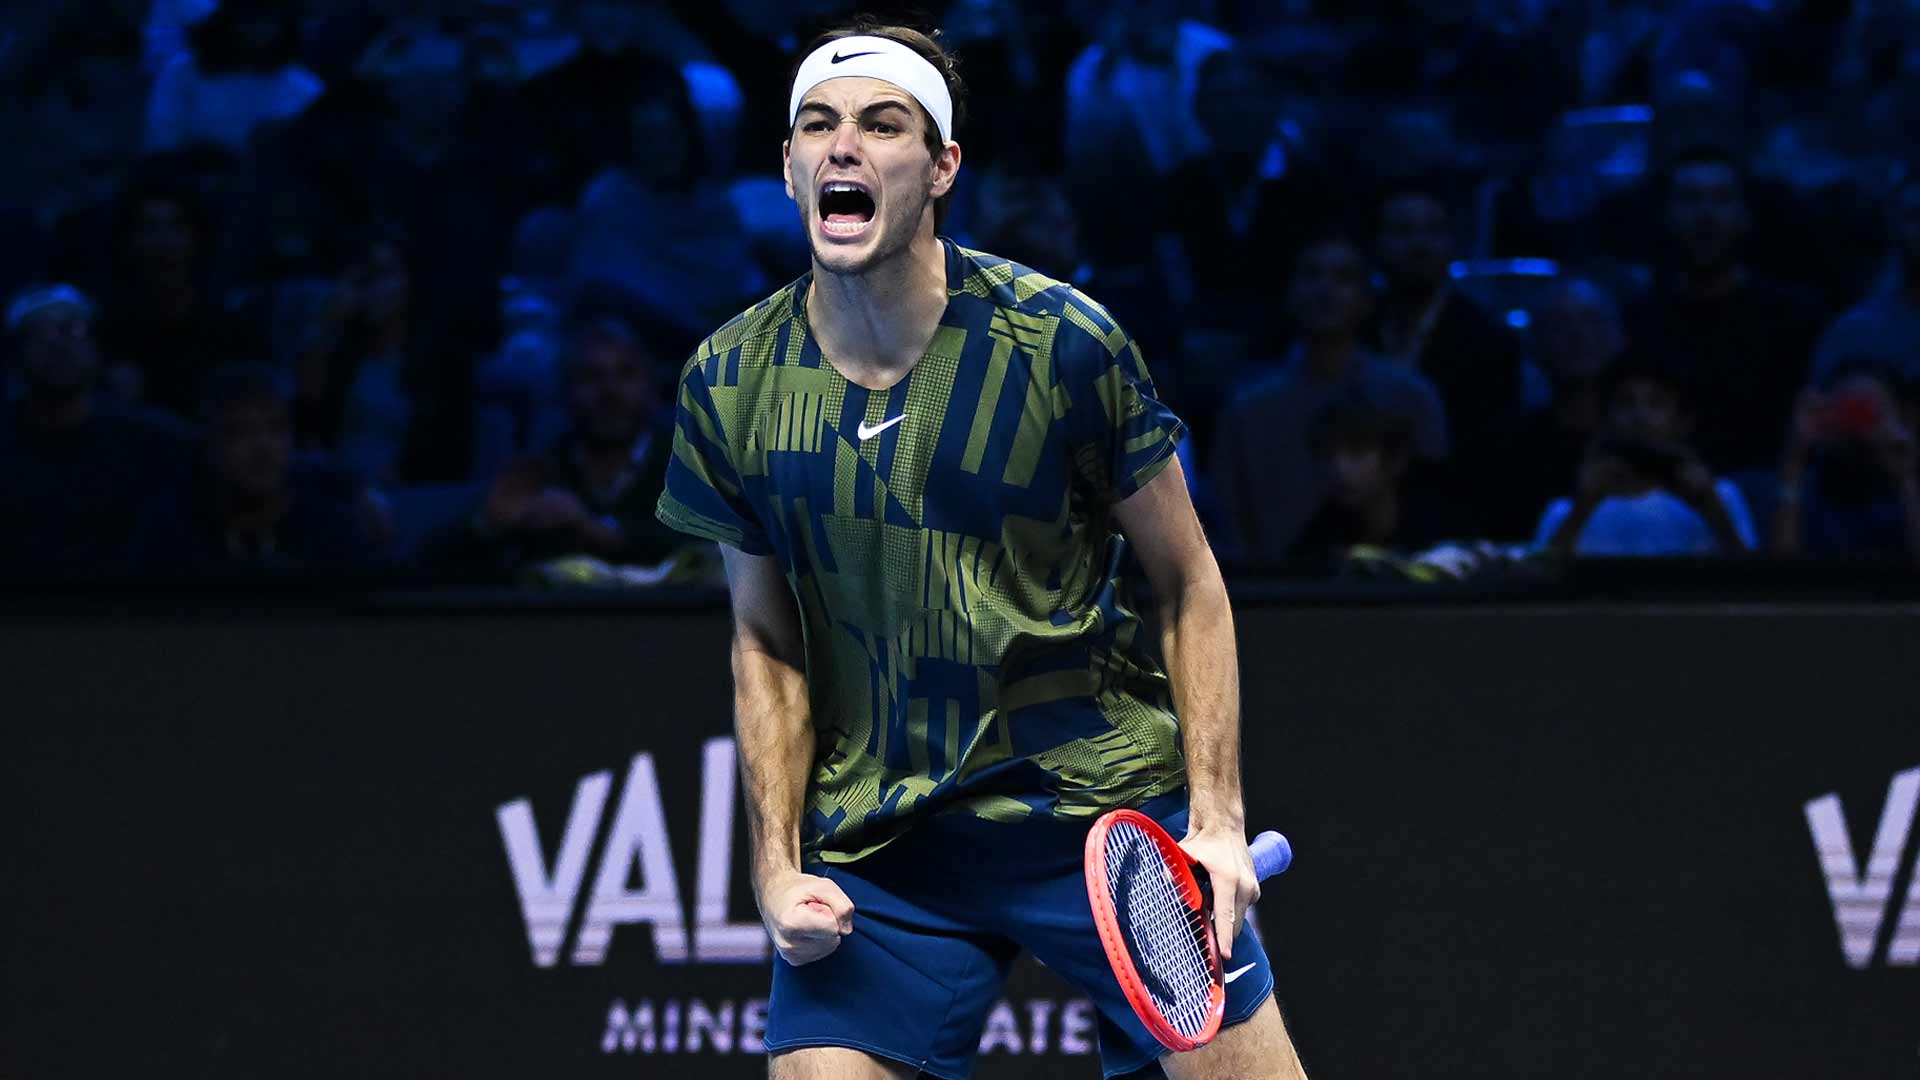 Taylor Fritz celebrates defeating Felix Auger-Aliassime on Friday at the Nitto ATP Finals.